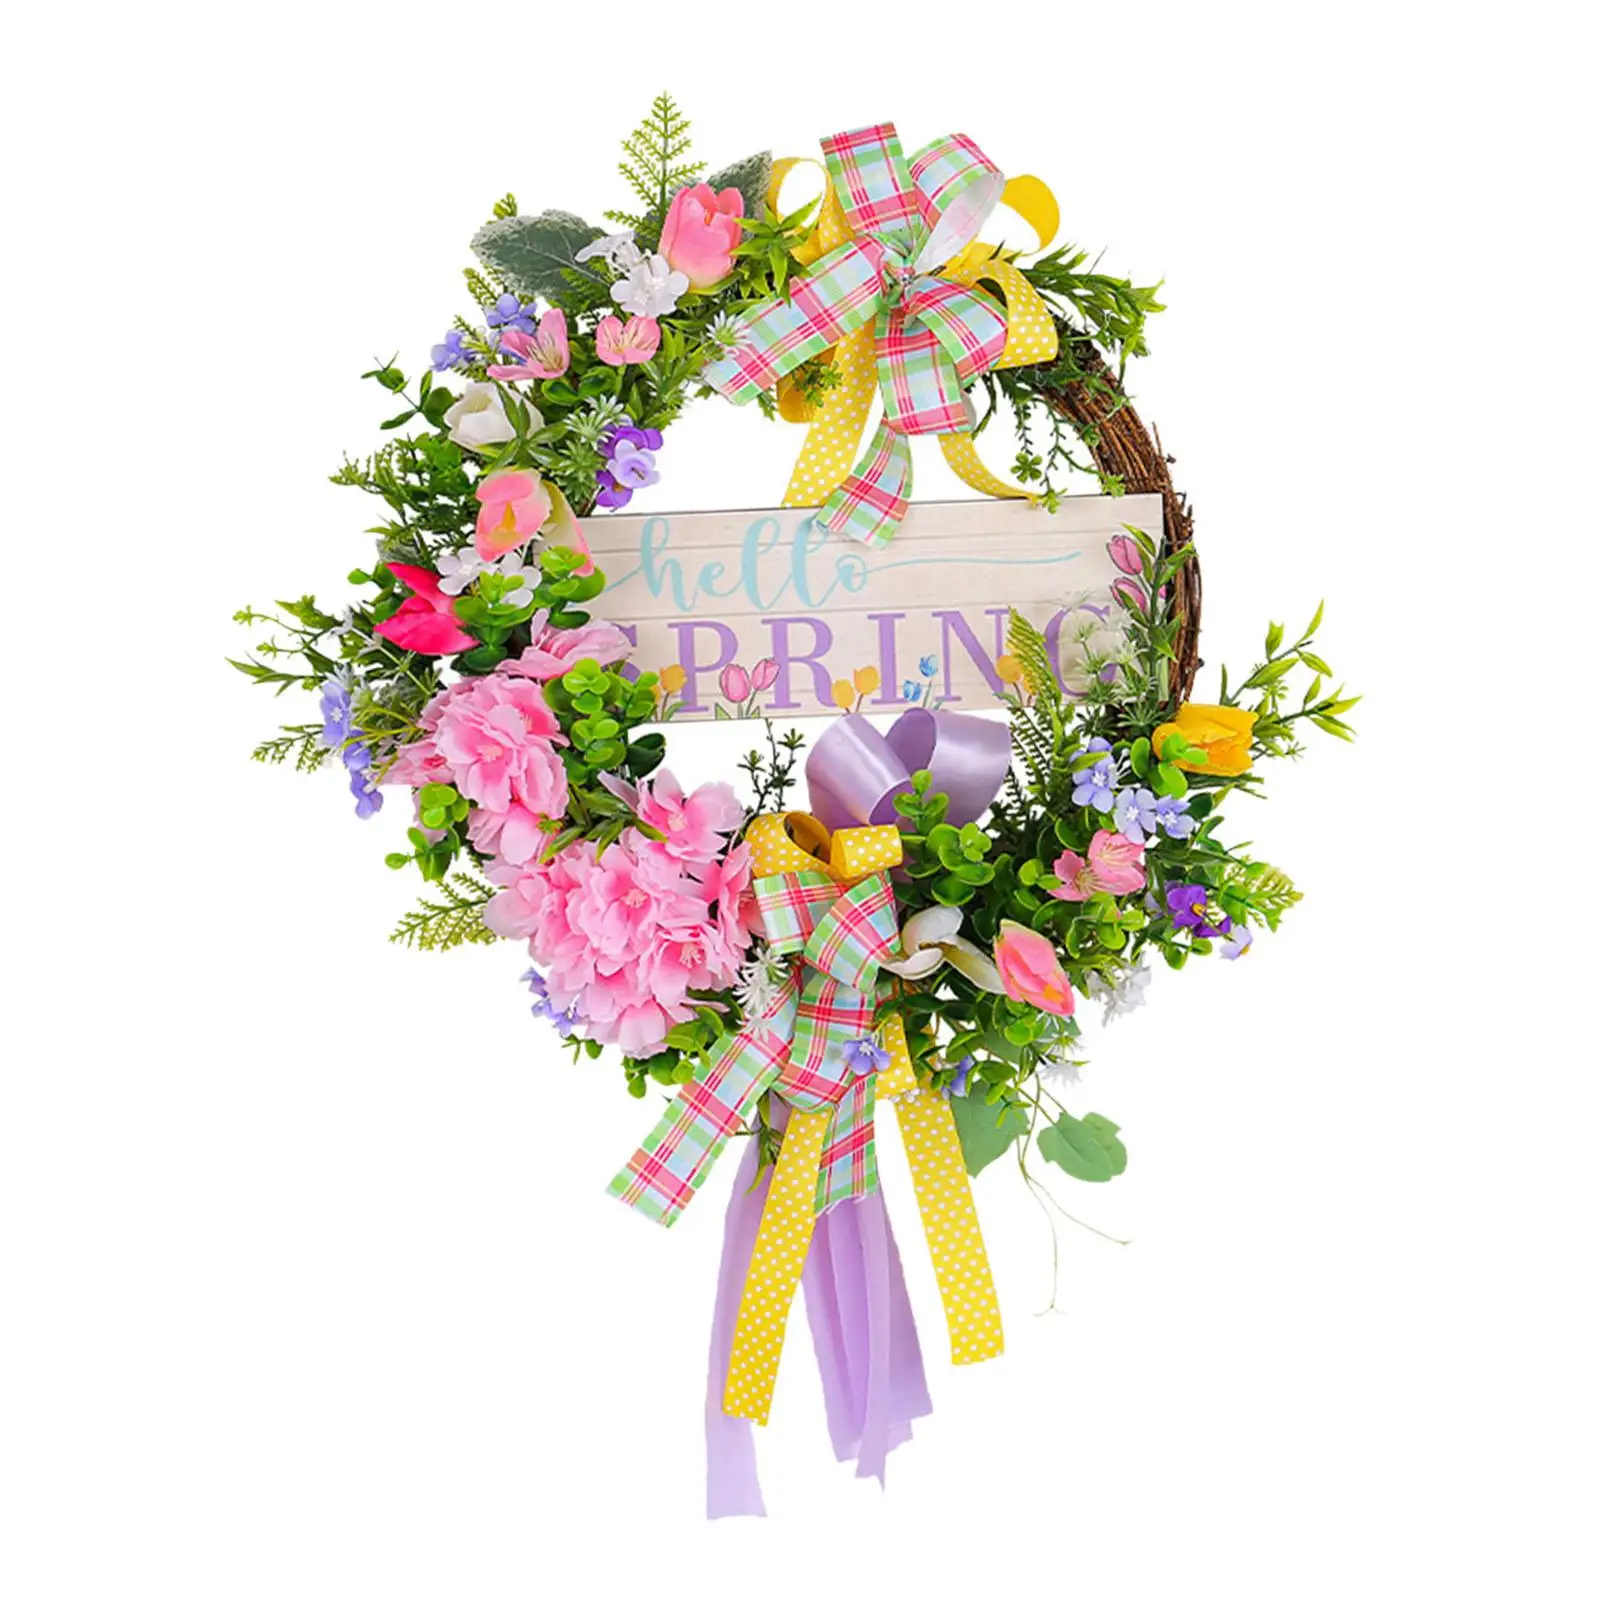 Spring Wreath Festival Atmosphere Decoration Simulation Wreaths Floral Hoop for Windows Porch Window Gallery Outside Outdoor